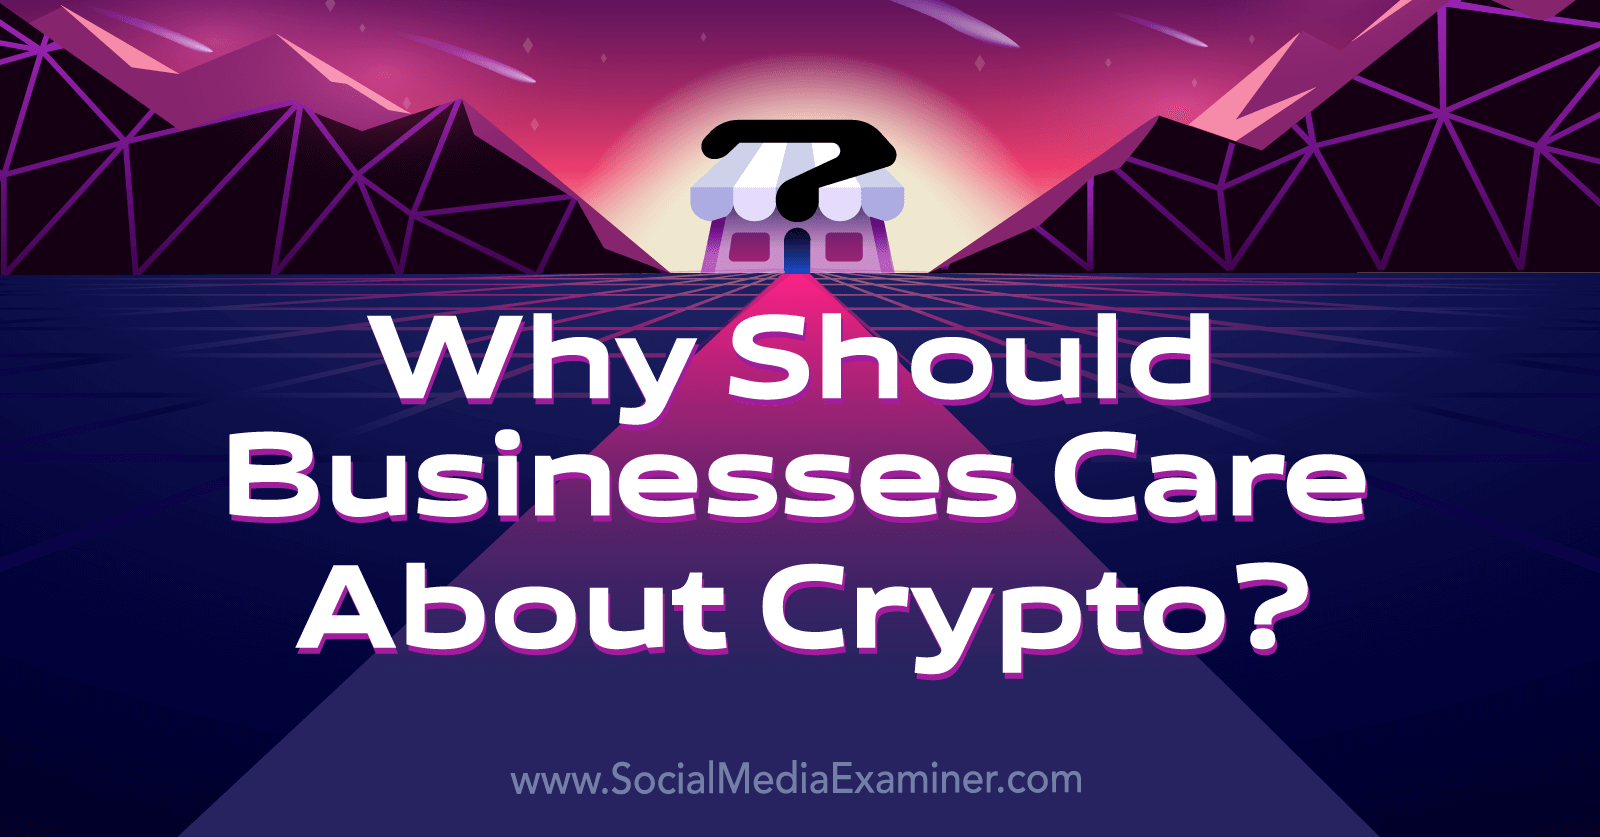 Why Should Businesses Care About Crypto? by Michael Stelzner